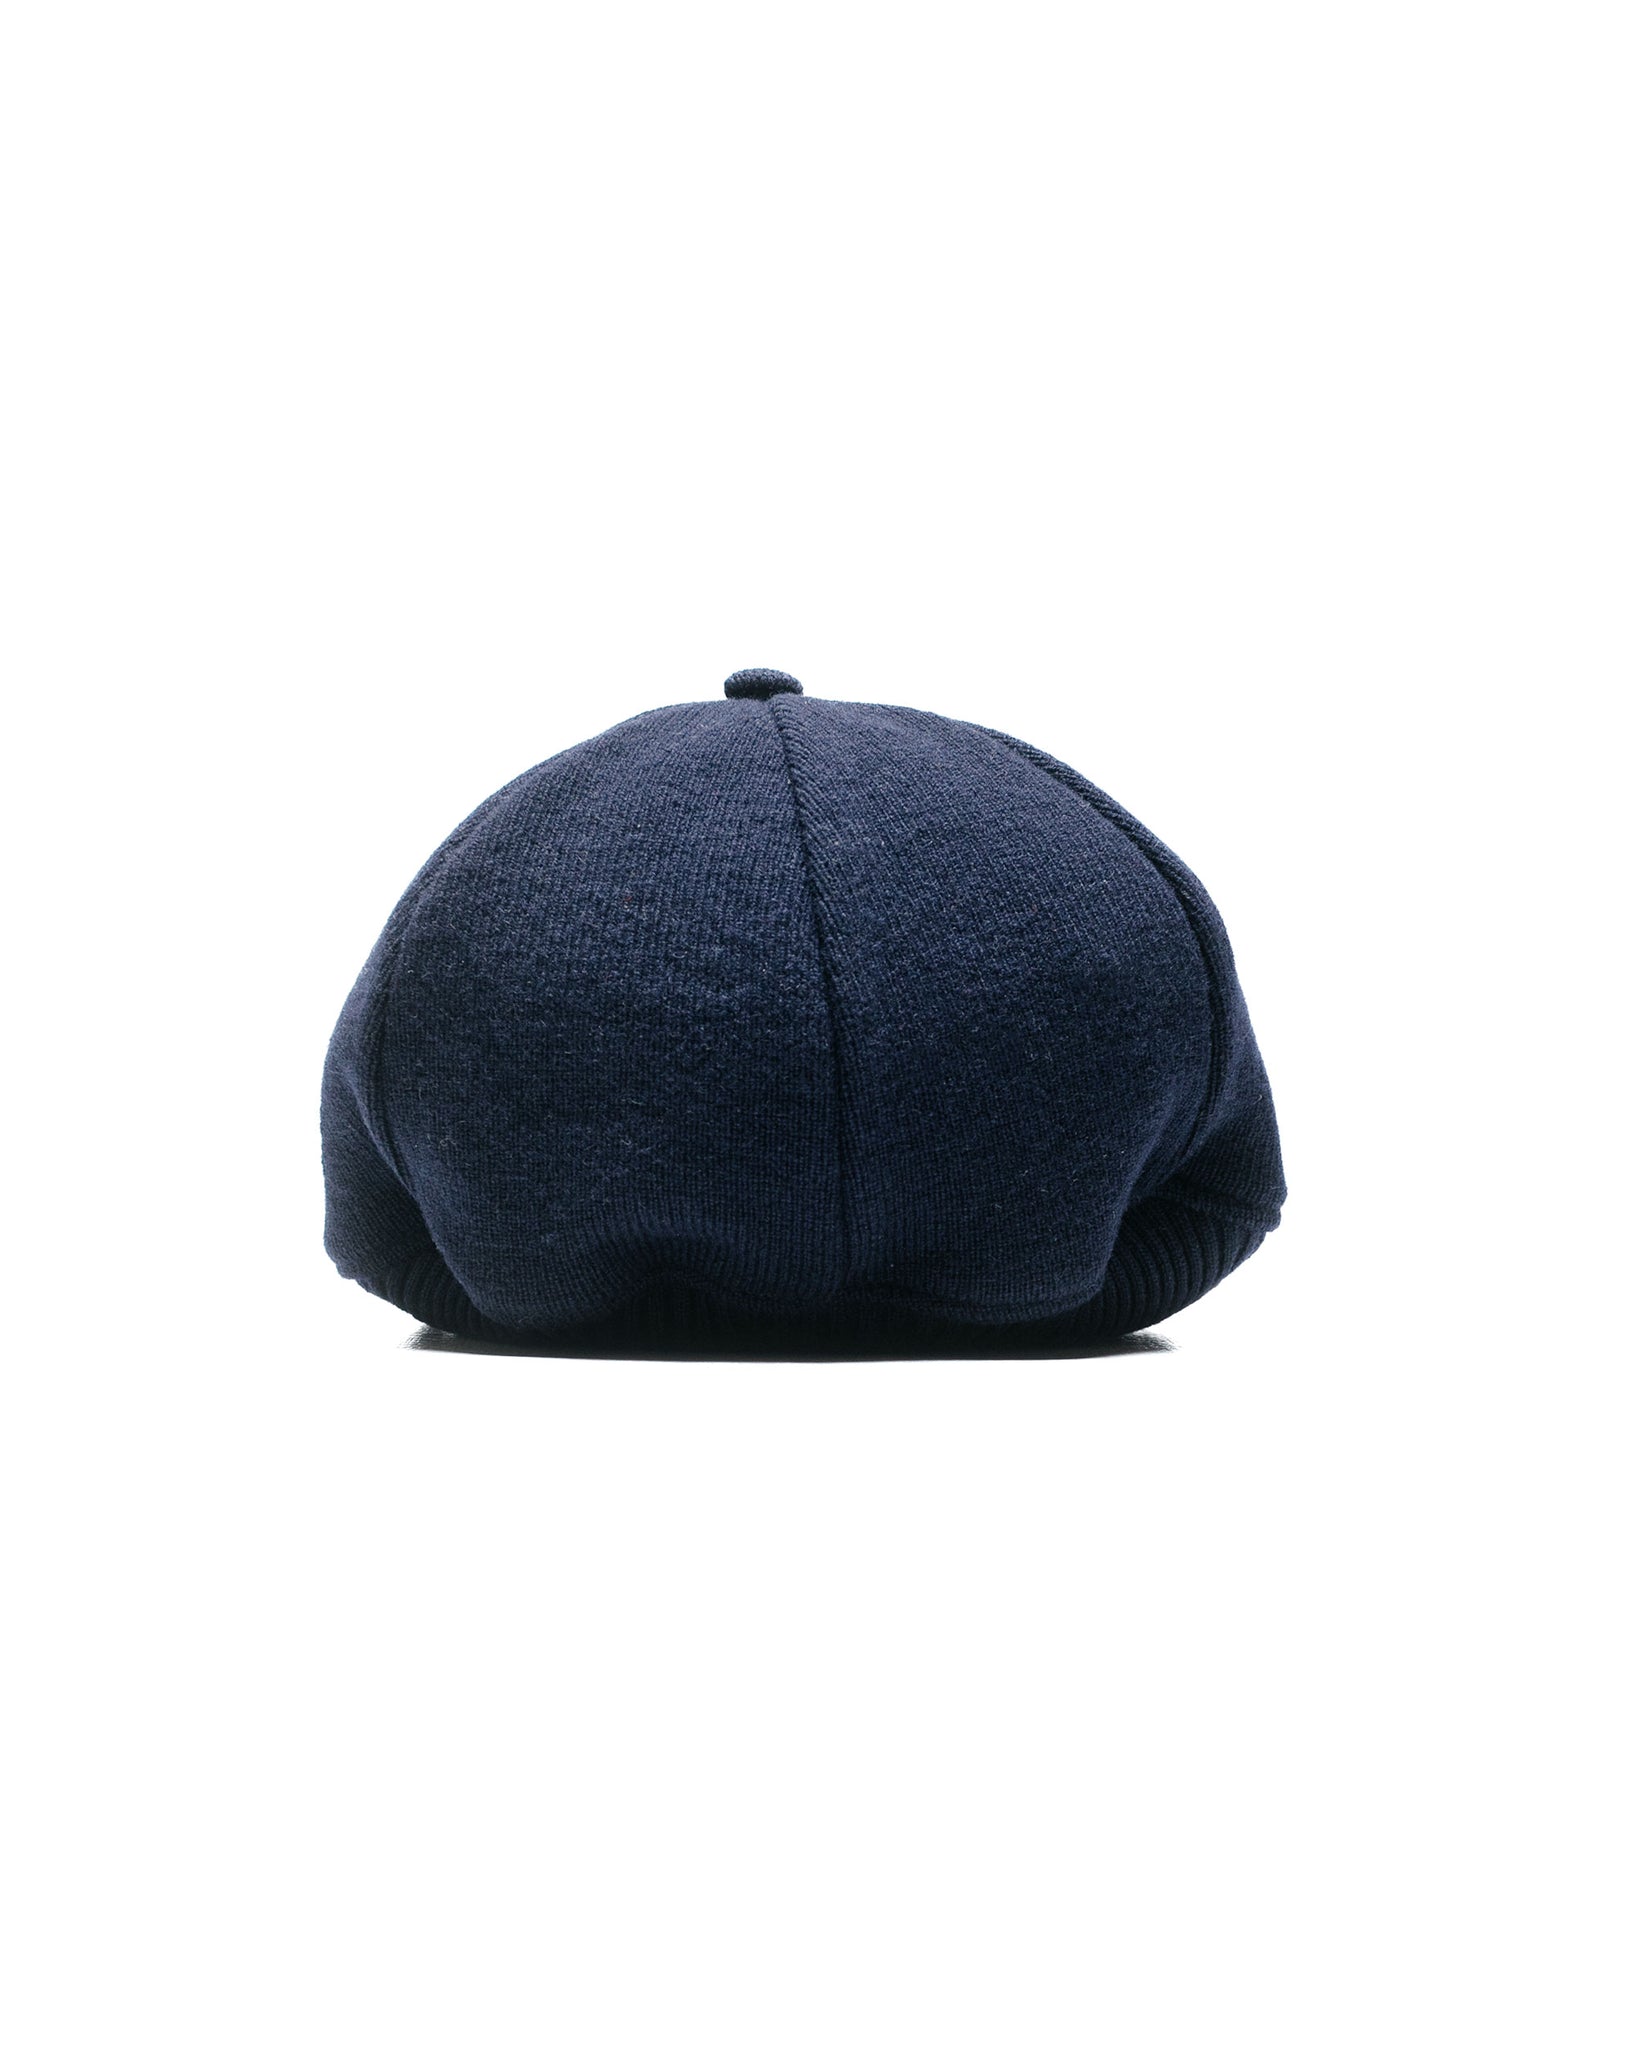 The Real McCoy's MA23107 Wool Rowing Knit Cap Navy back